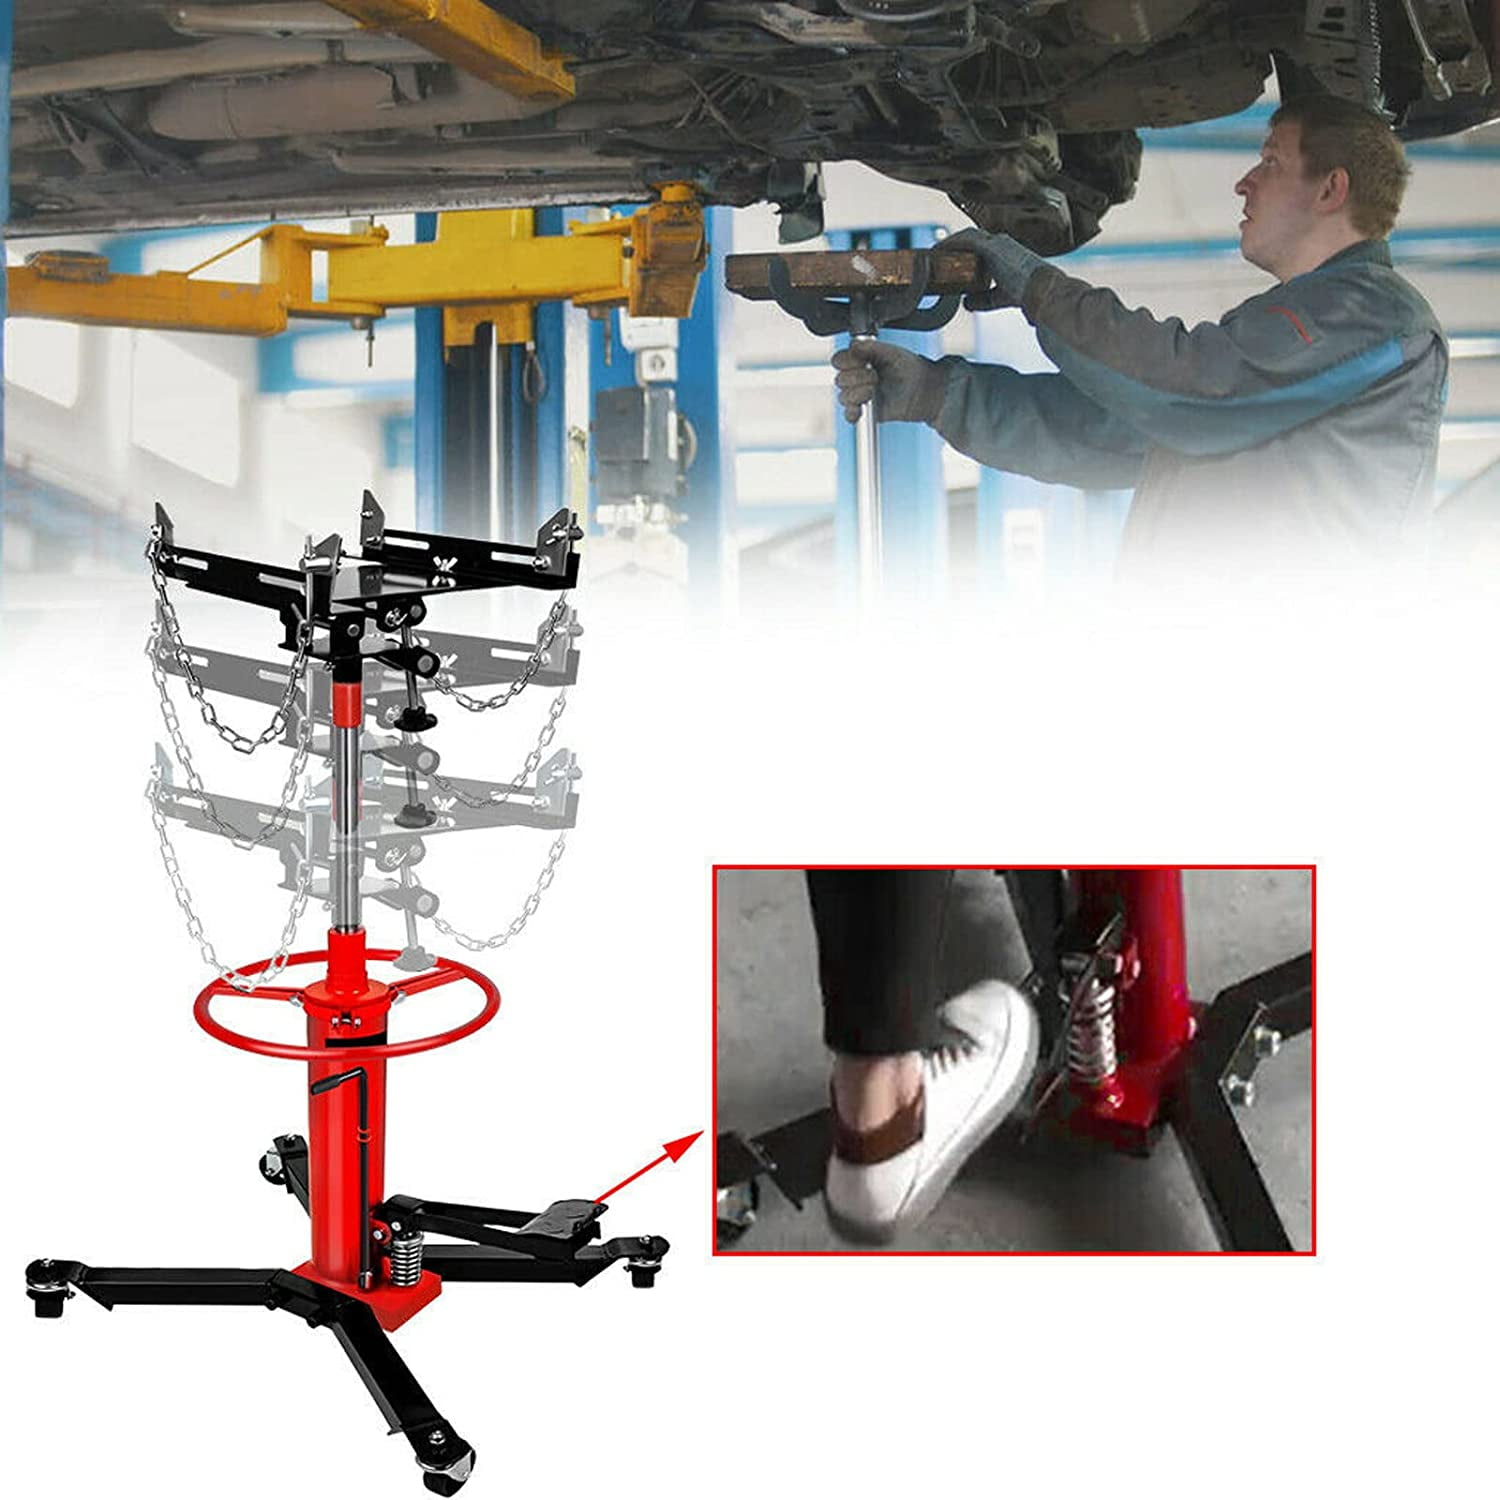 Can Be Used For Car Lifting Adjustable Height 1100 Pounds 2-Stage Hydraulic Telescopic Drive Jack TUOKE Hydraulic Transmission Jack Vertical Lift With Foot Pump 360°Rotating Wheel Lift 